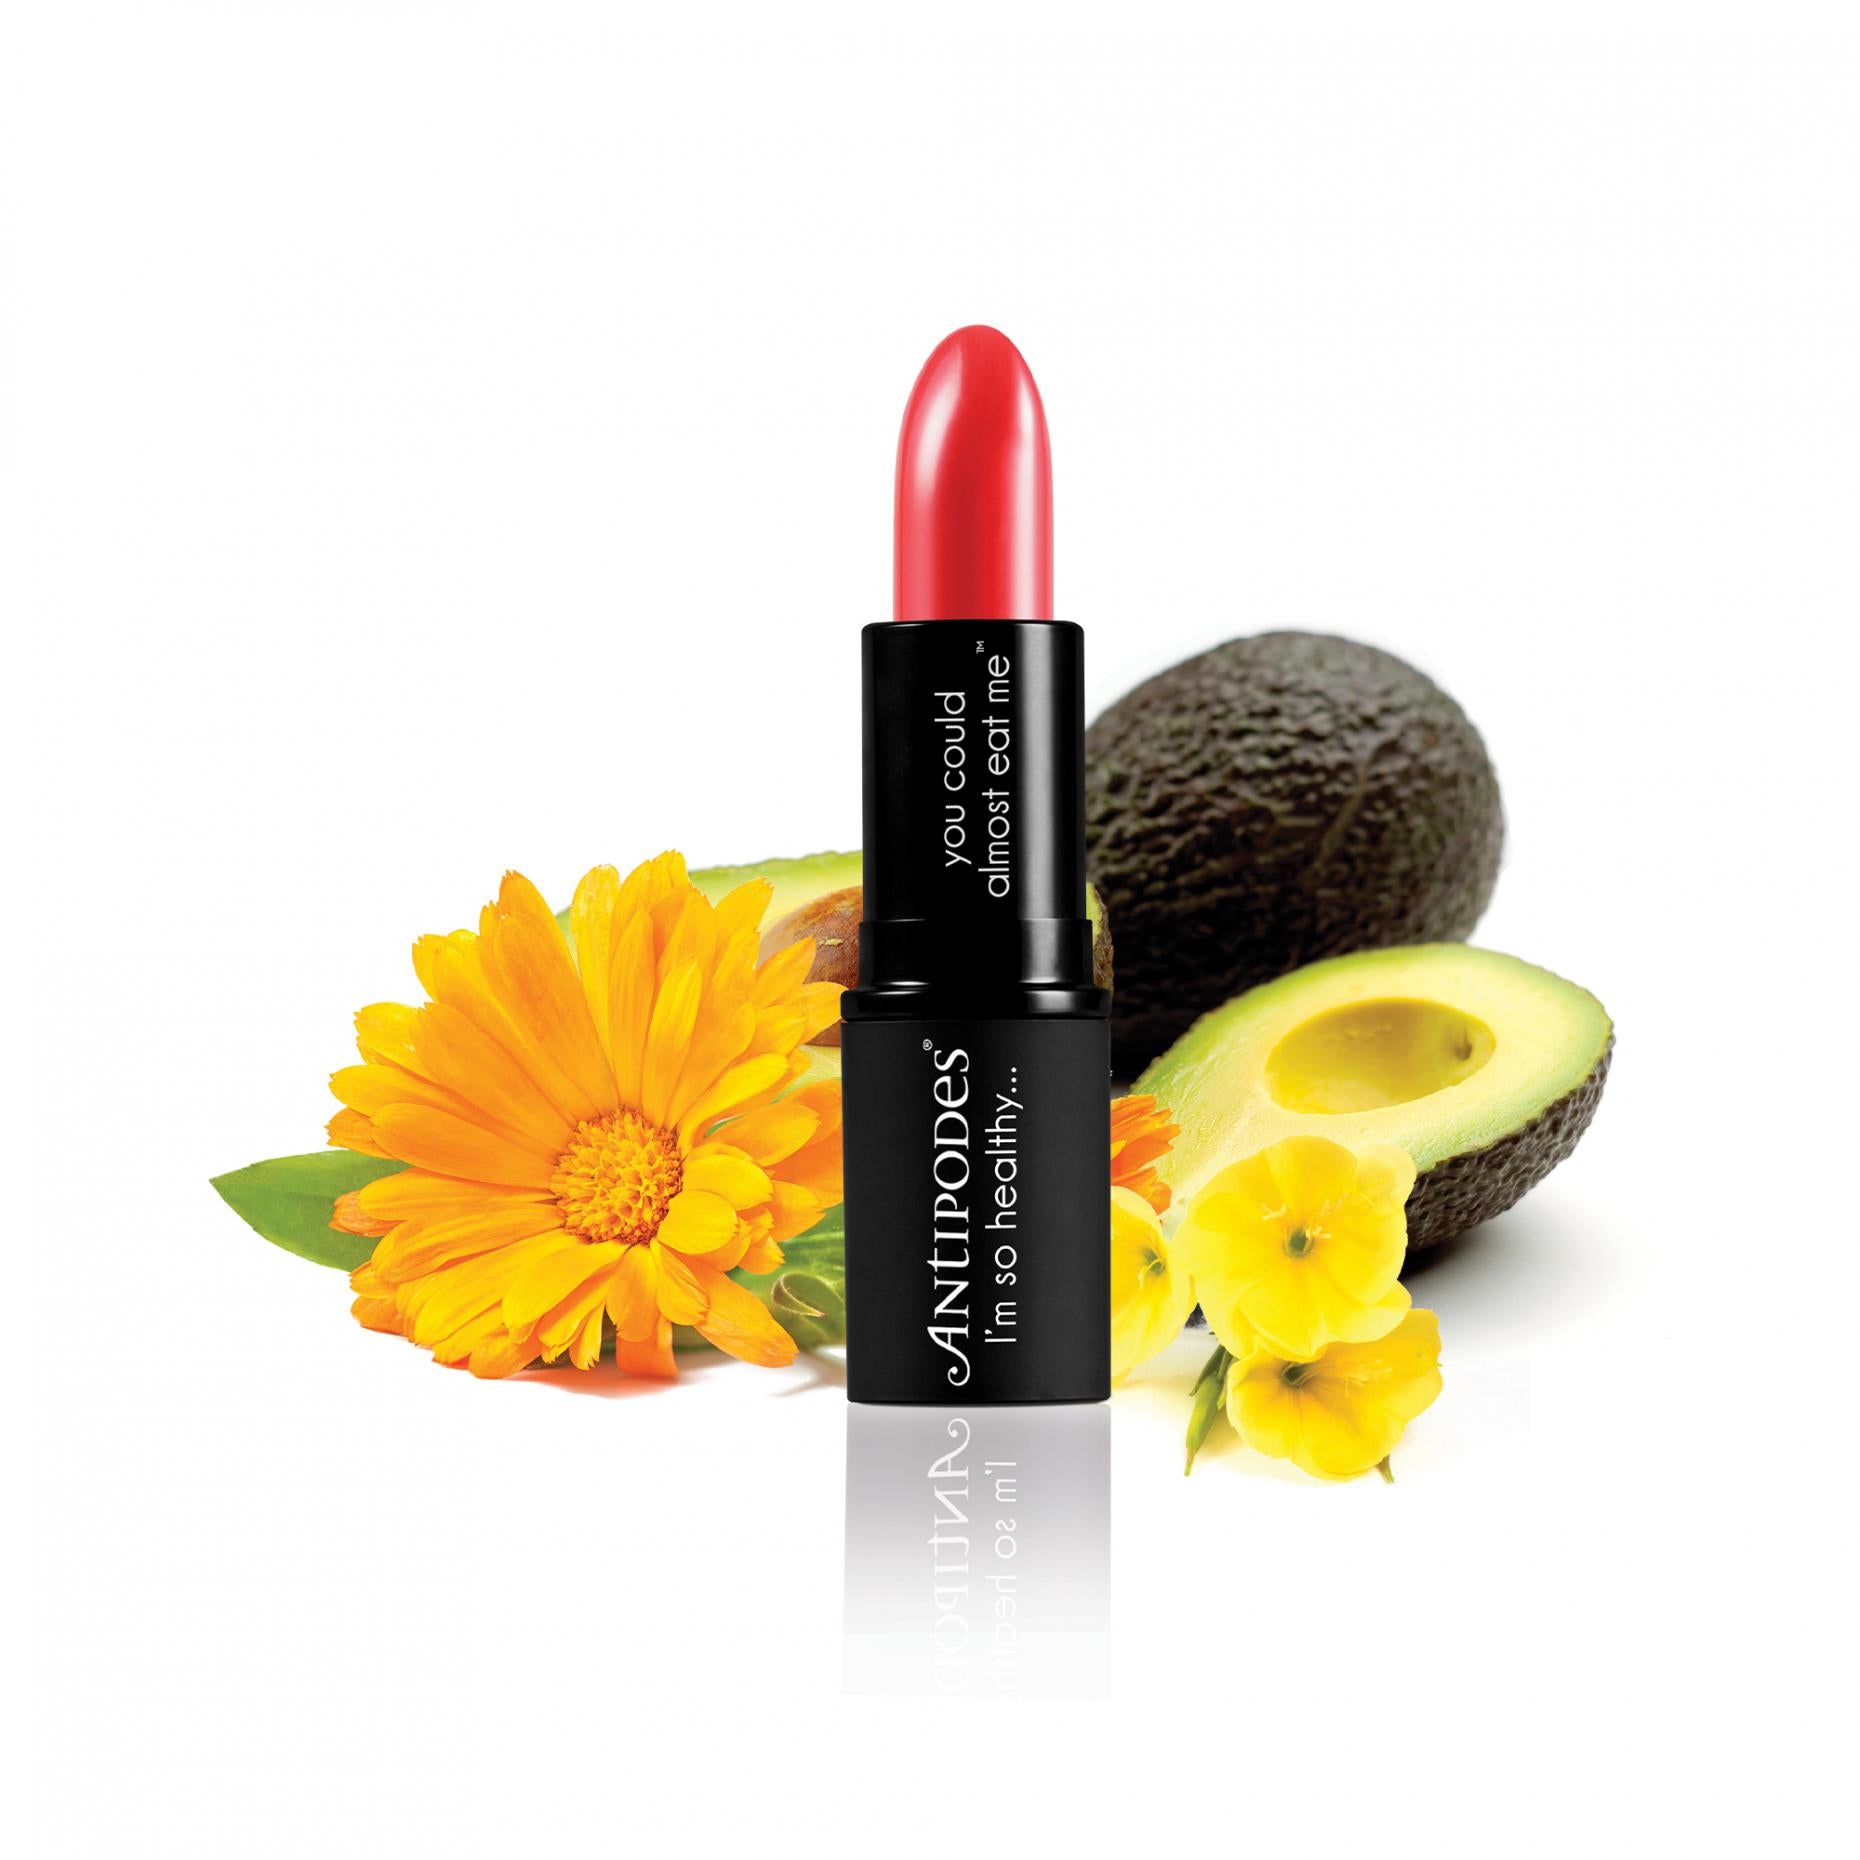 Antipodes South Pacific Coral Lipstick 4g